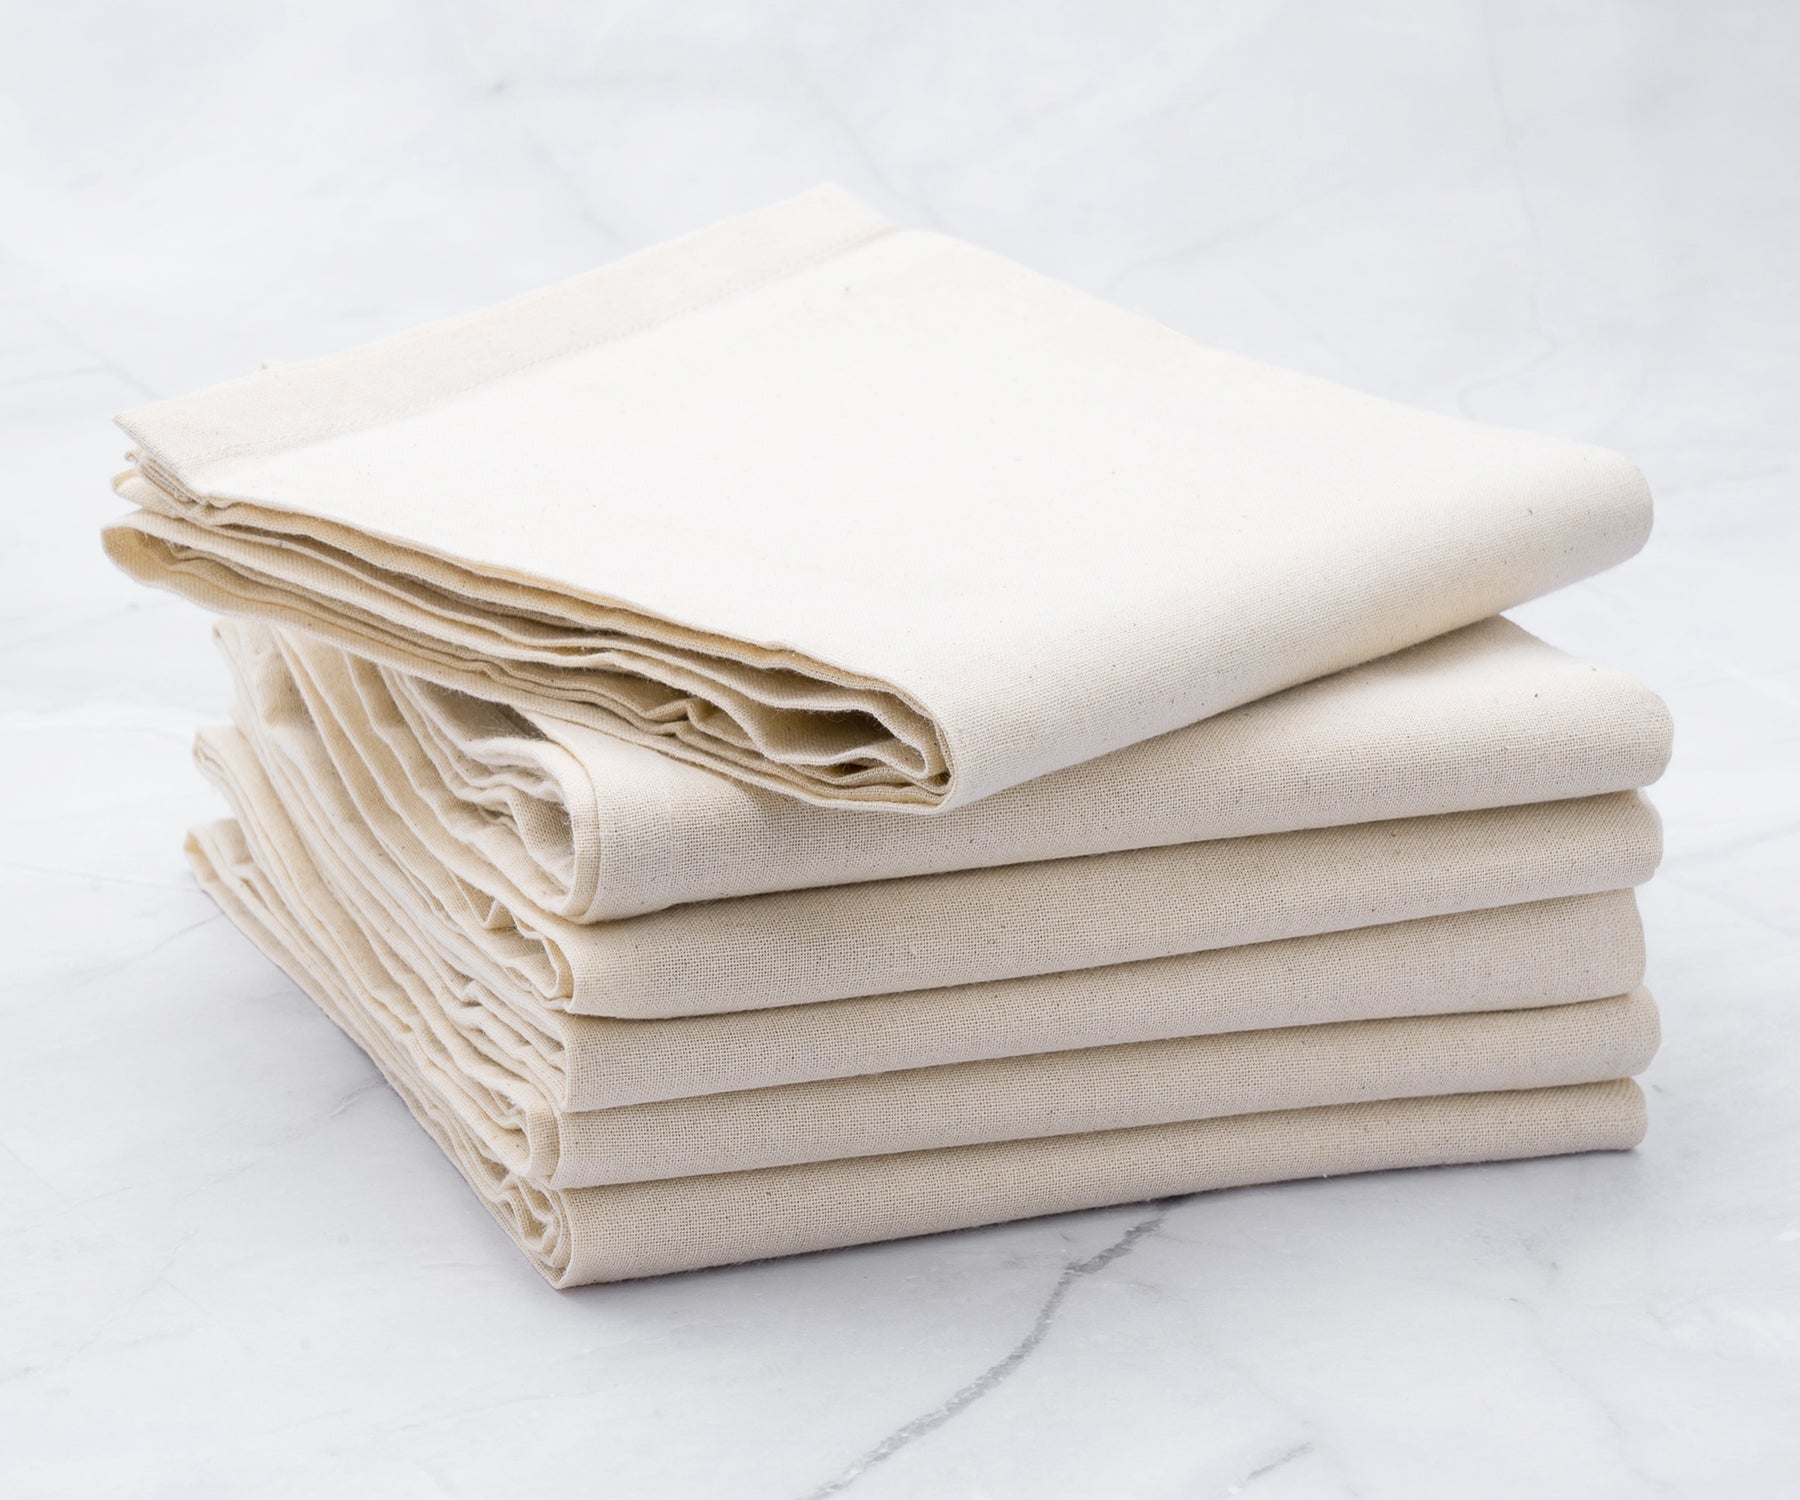 flour sack towels, grain sack kitchen towels or linen tea towels are suitable for kitchen cleaning. easter hand towels.